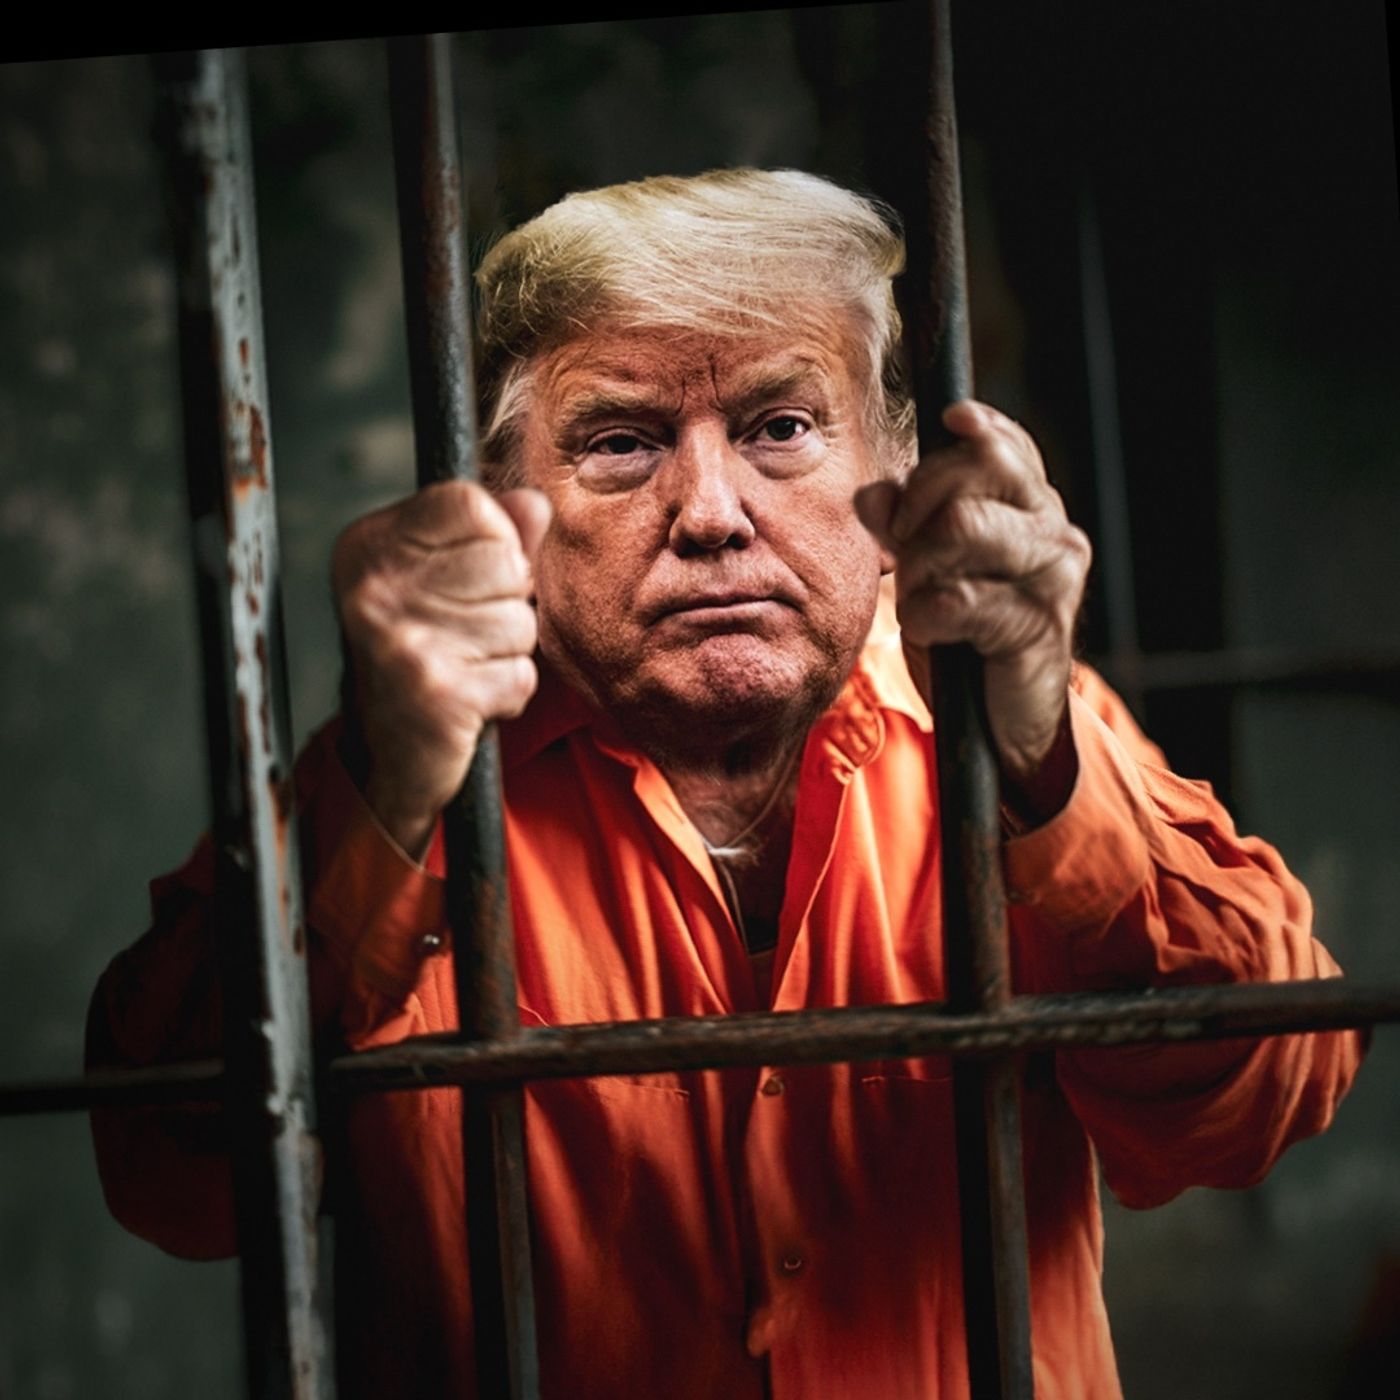 4: George Conway Explains: Trump’s 91 Problems (& Jail is One)